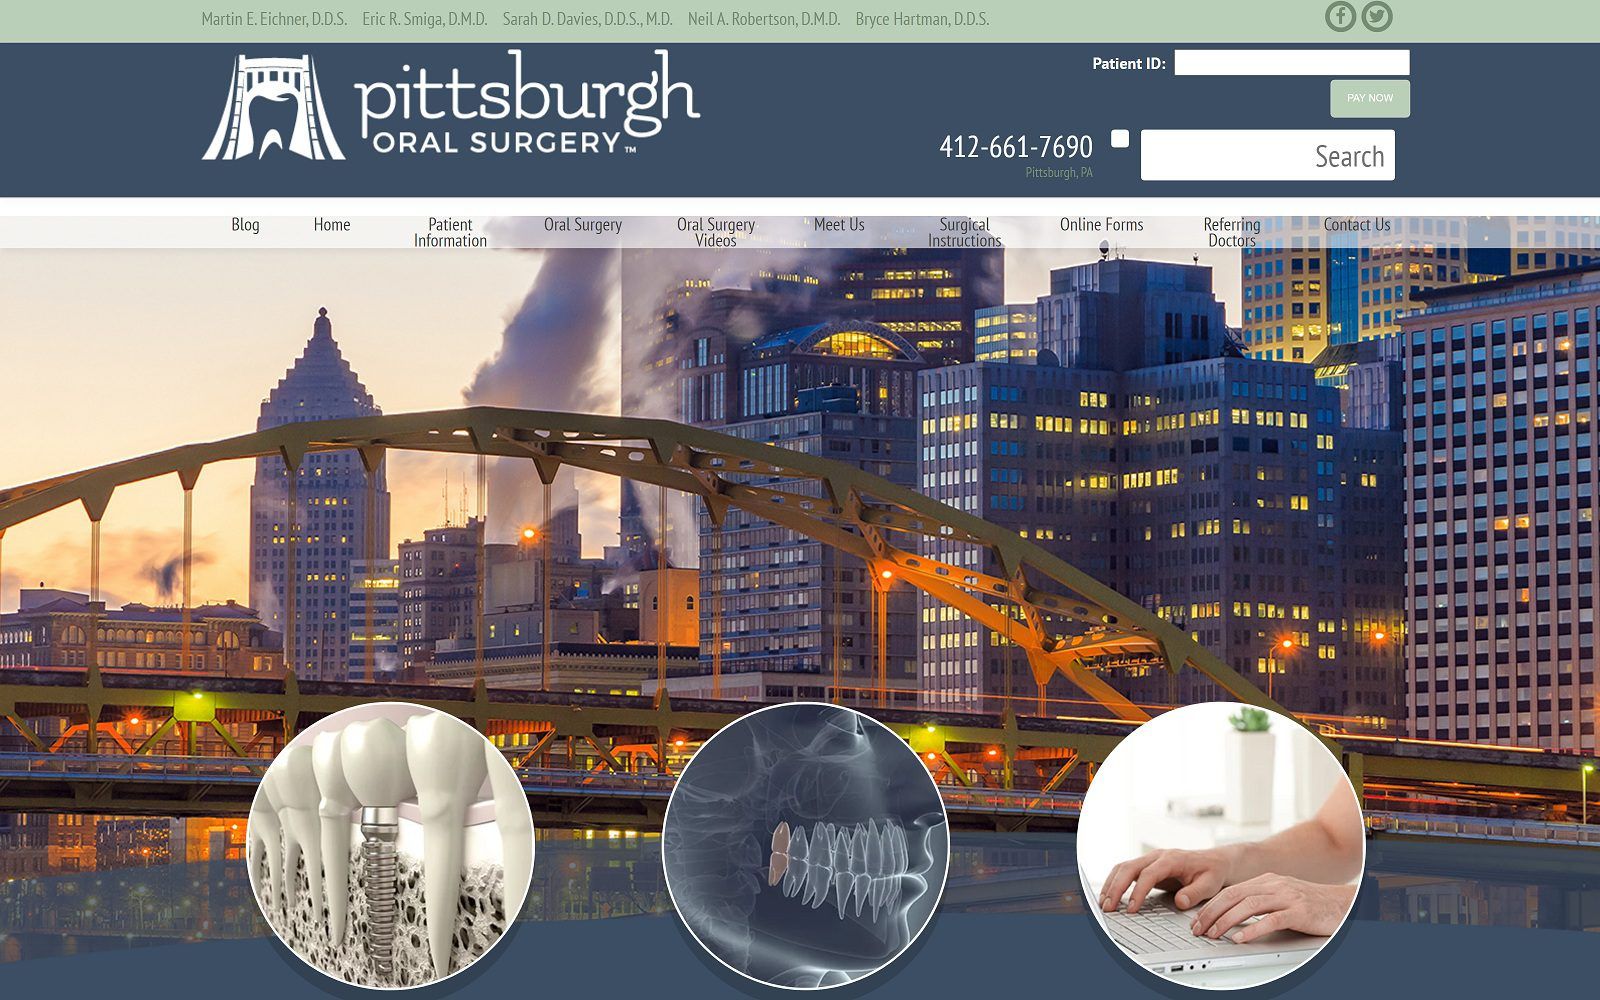 The screenshot of pittsburgh oral surgery website